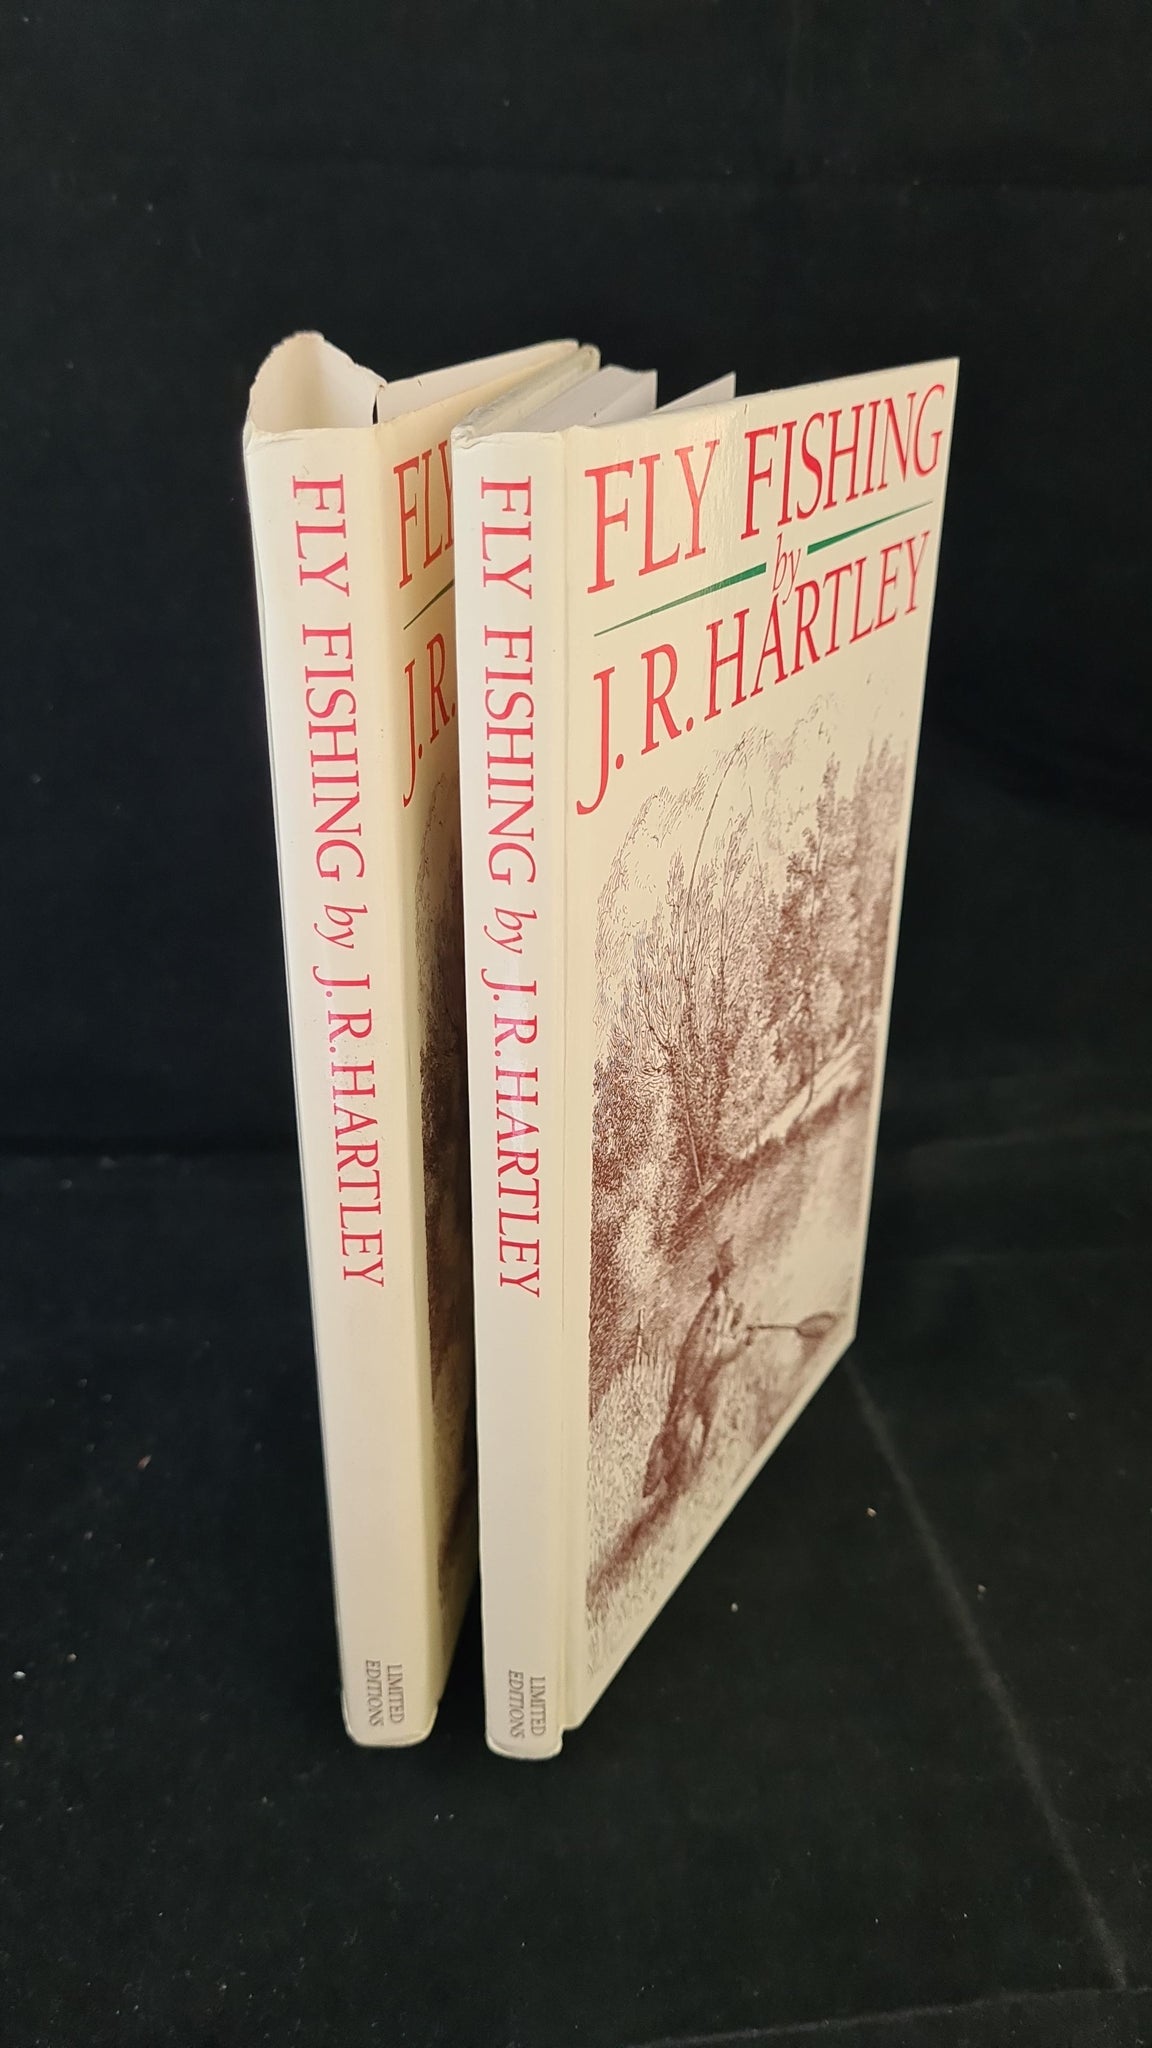 J R Hartley - Fly Fishing, Limited Editions, 1991 – Richard